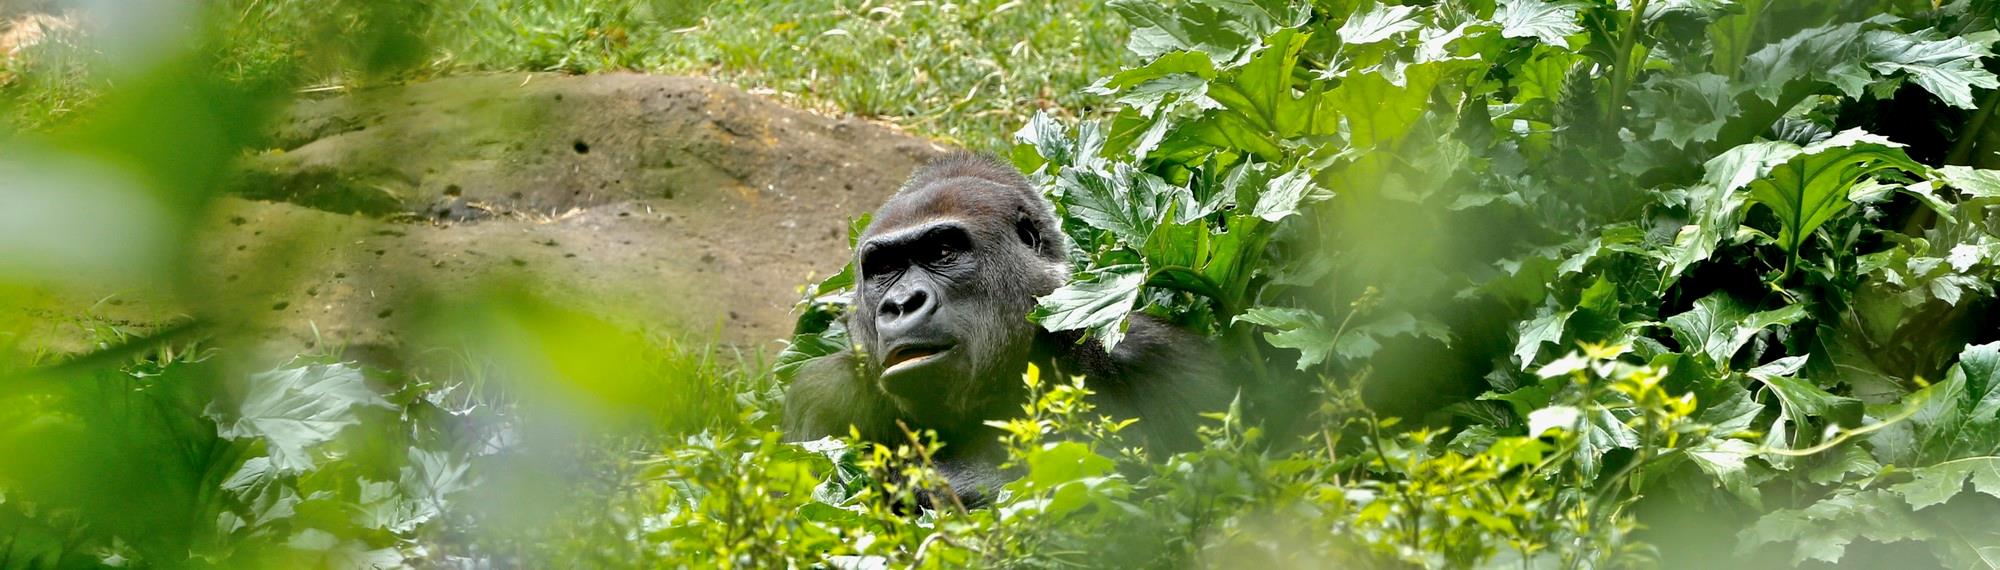 Yuska, the Lowland Gorilla, in bushes with body covered by leaves.